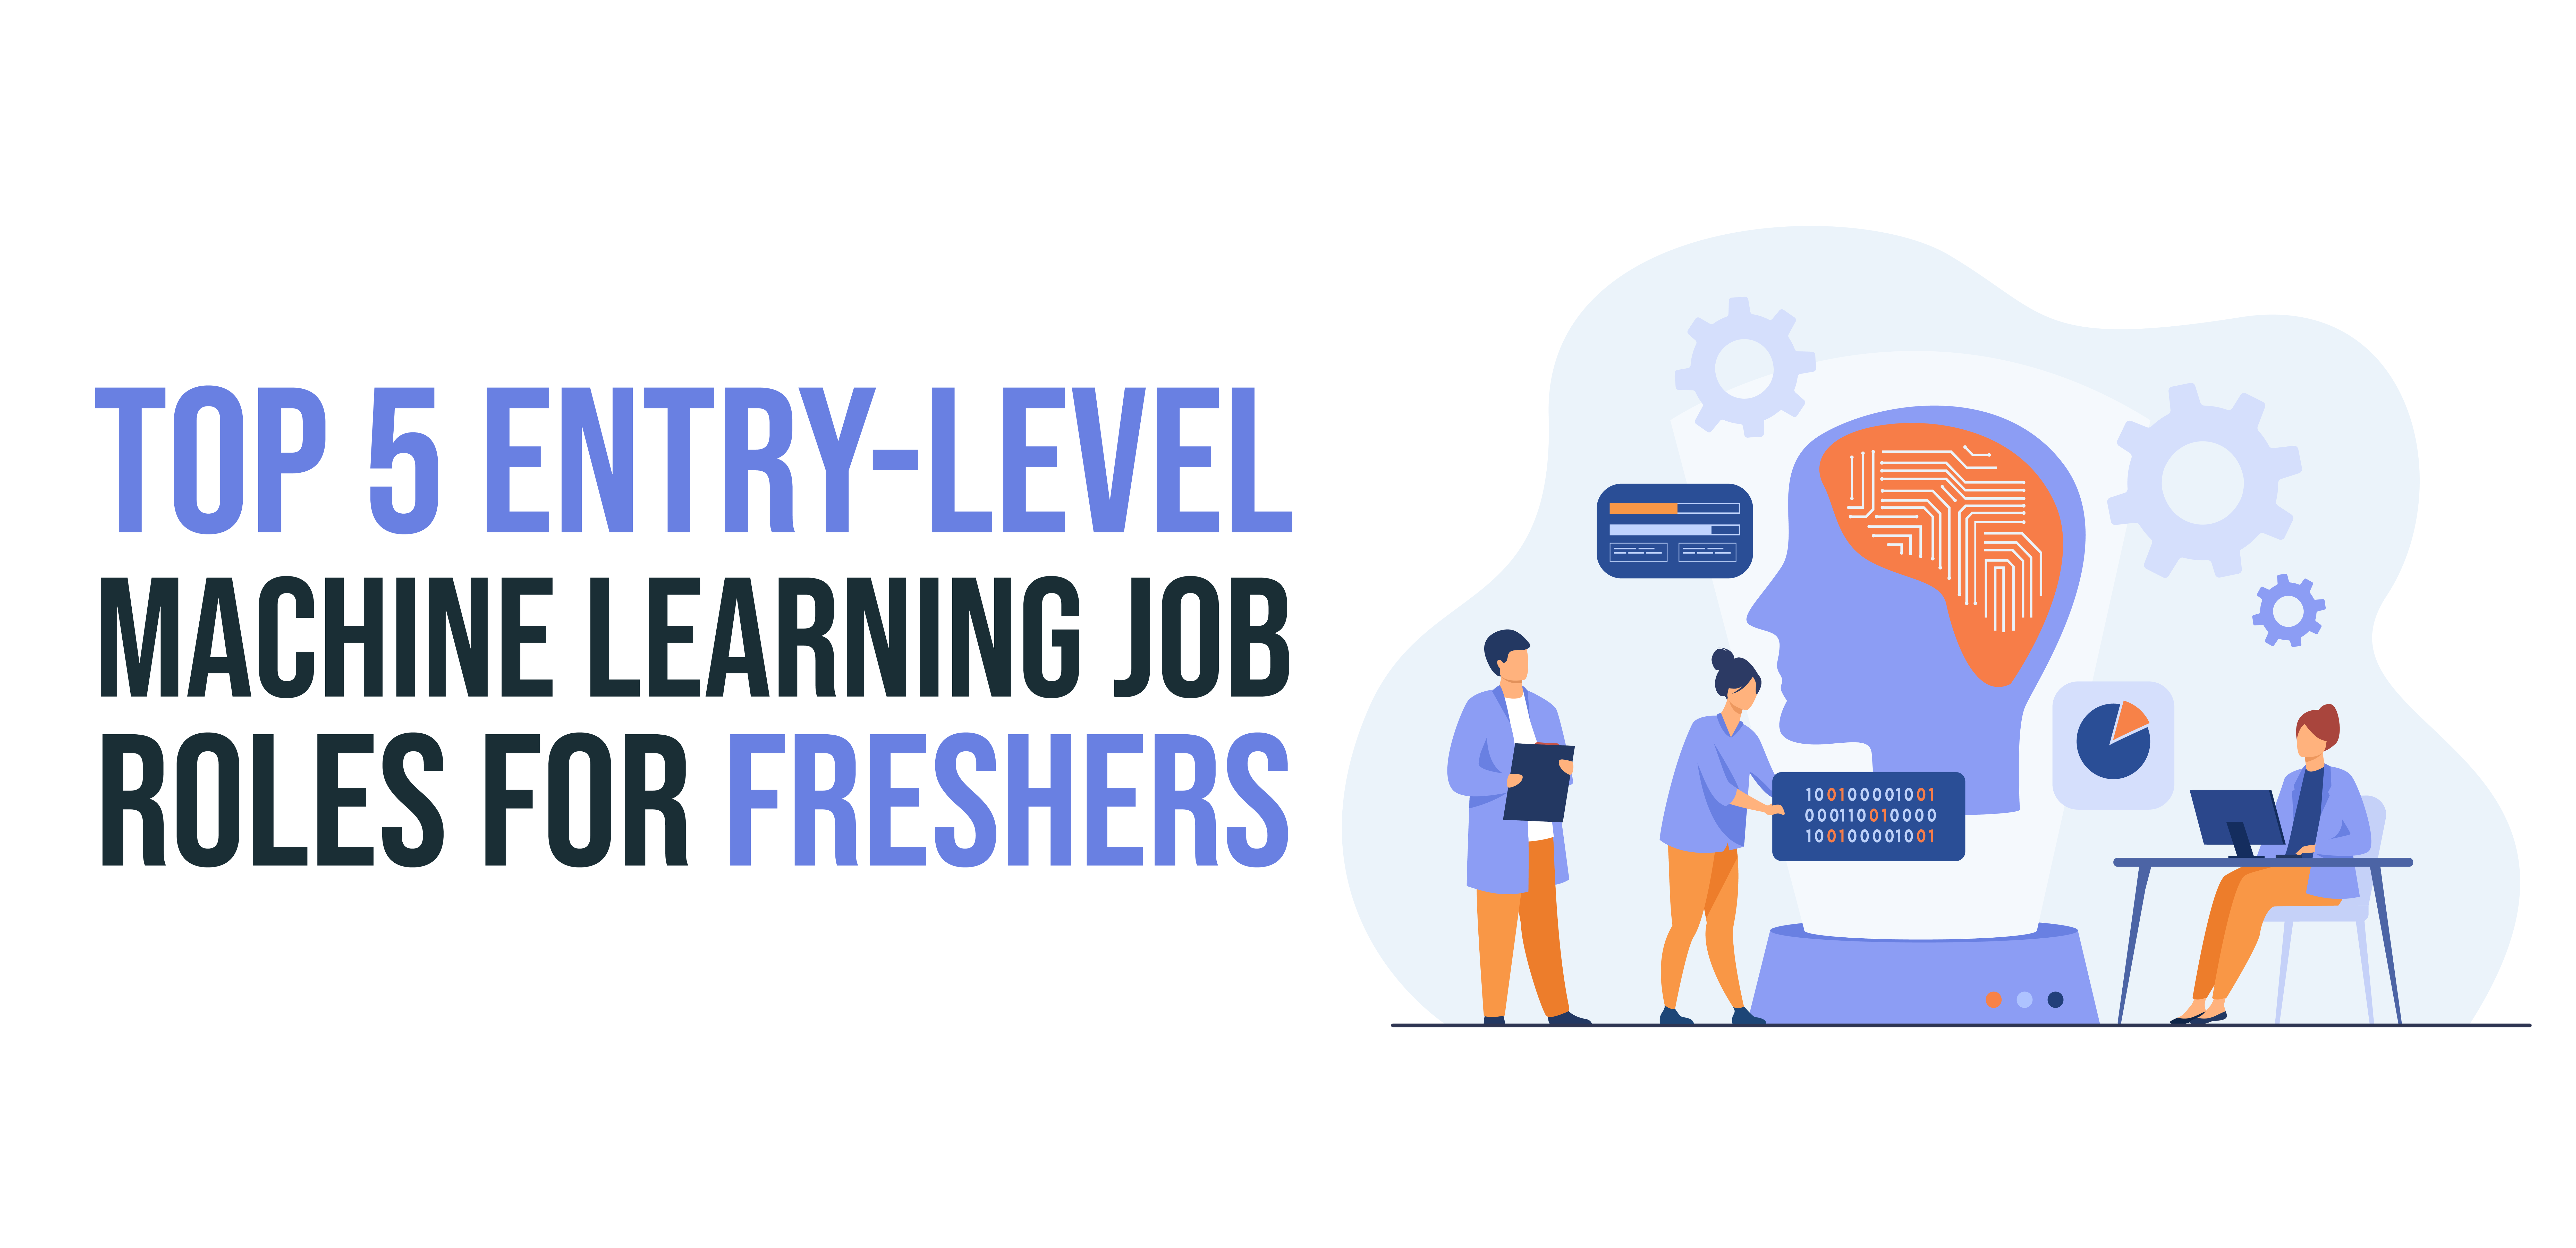 Top 5 Entry-Level Machine Learning Job Roles for Freshers